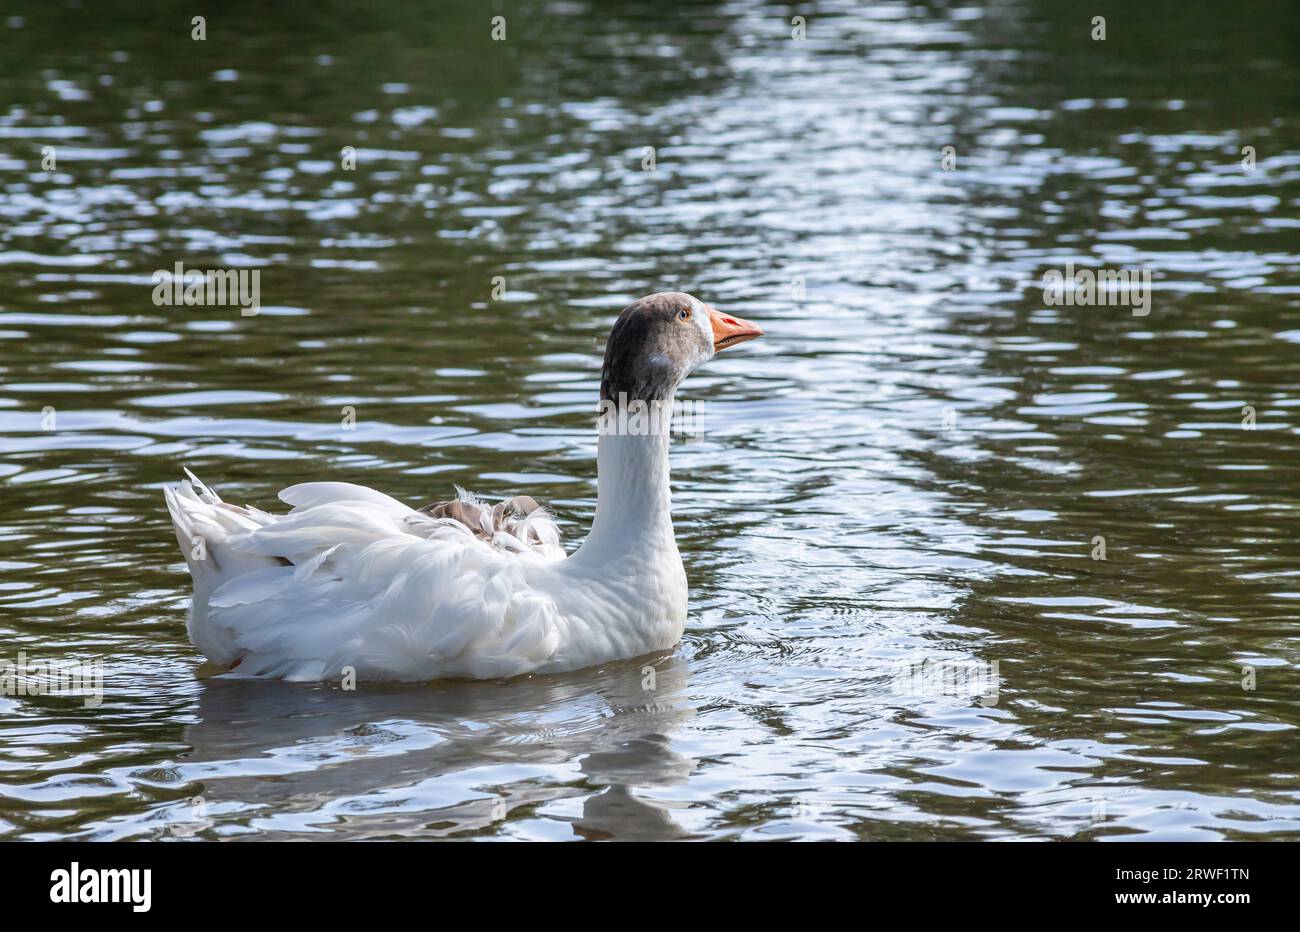 group of domestic white farm geese swim and splash water drops in dirty muddy water, enjoy first warm sun rays, peace and tranquillity of nature, pure Stock Photo